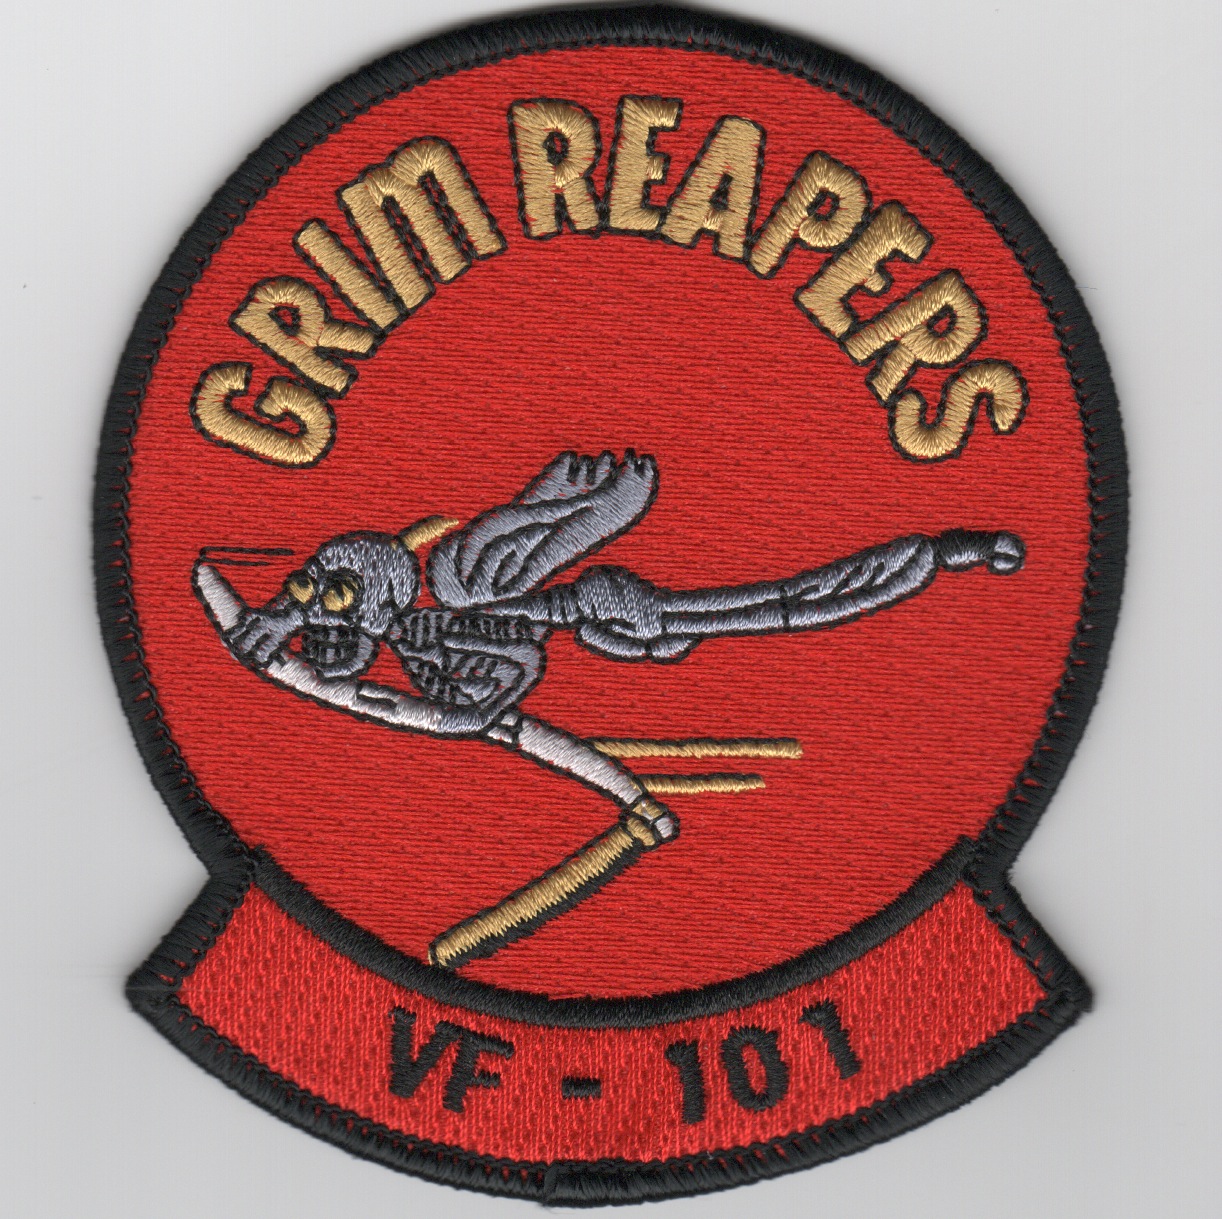 VF-101 Squadron Patch (Red)